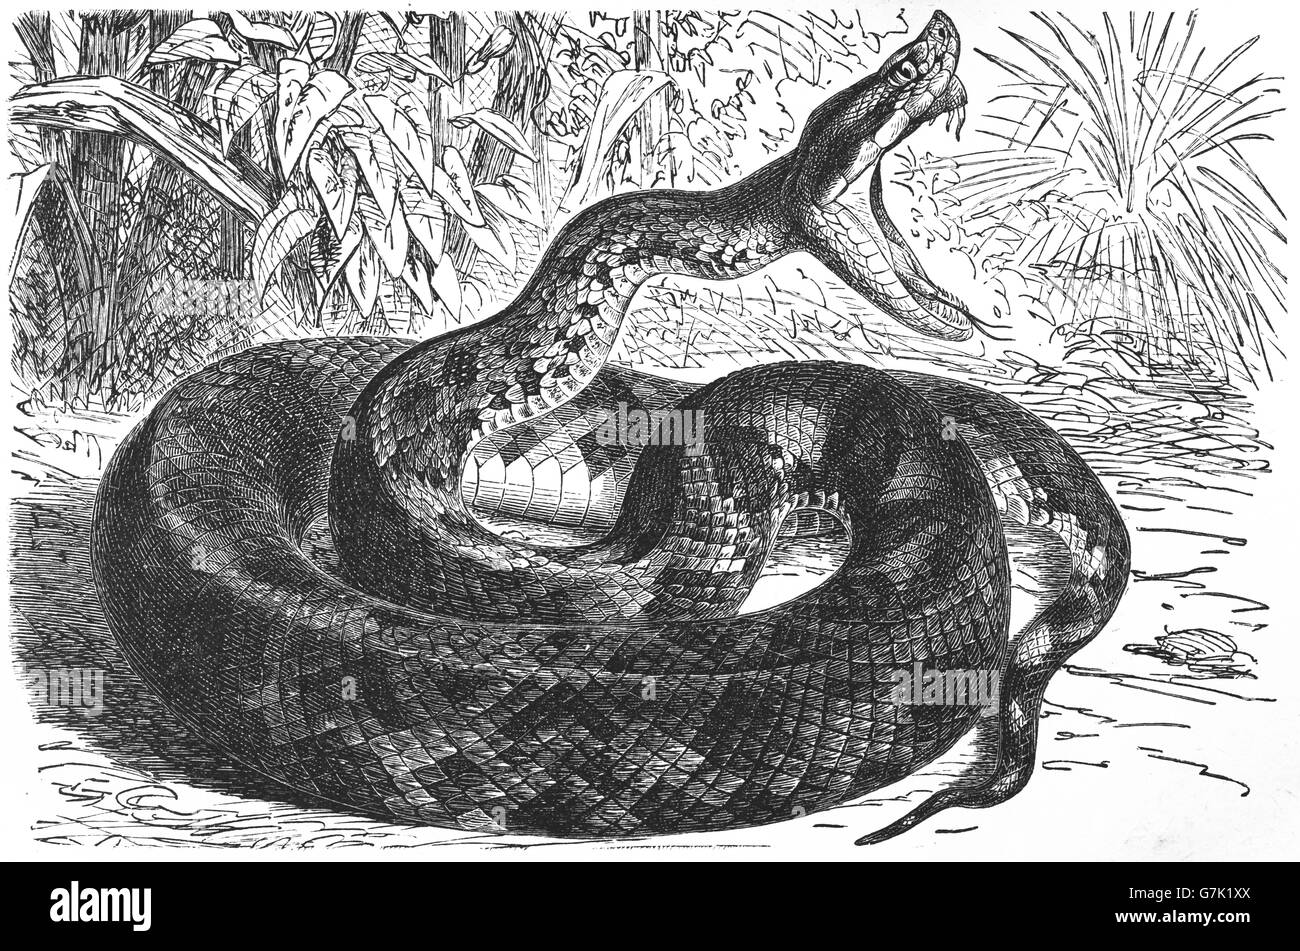 Martinican pit viper, Martinique lancehead, fer-de-lance, Bothrops lanceolatus, illustration from book dated 1904 Stock Photo